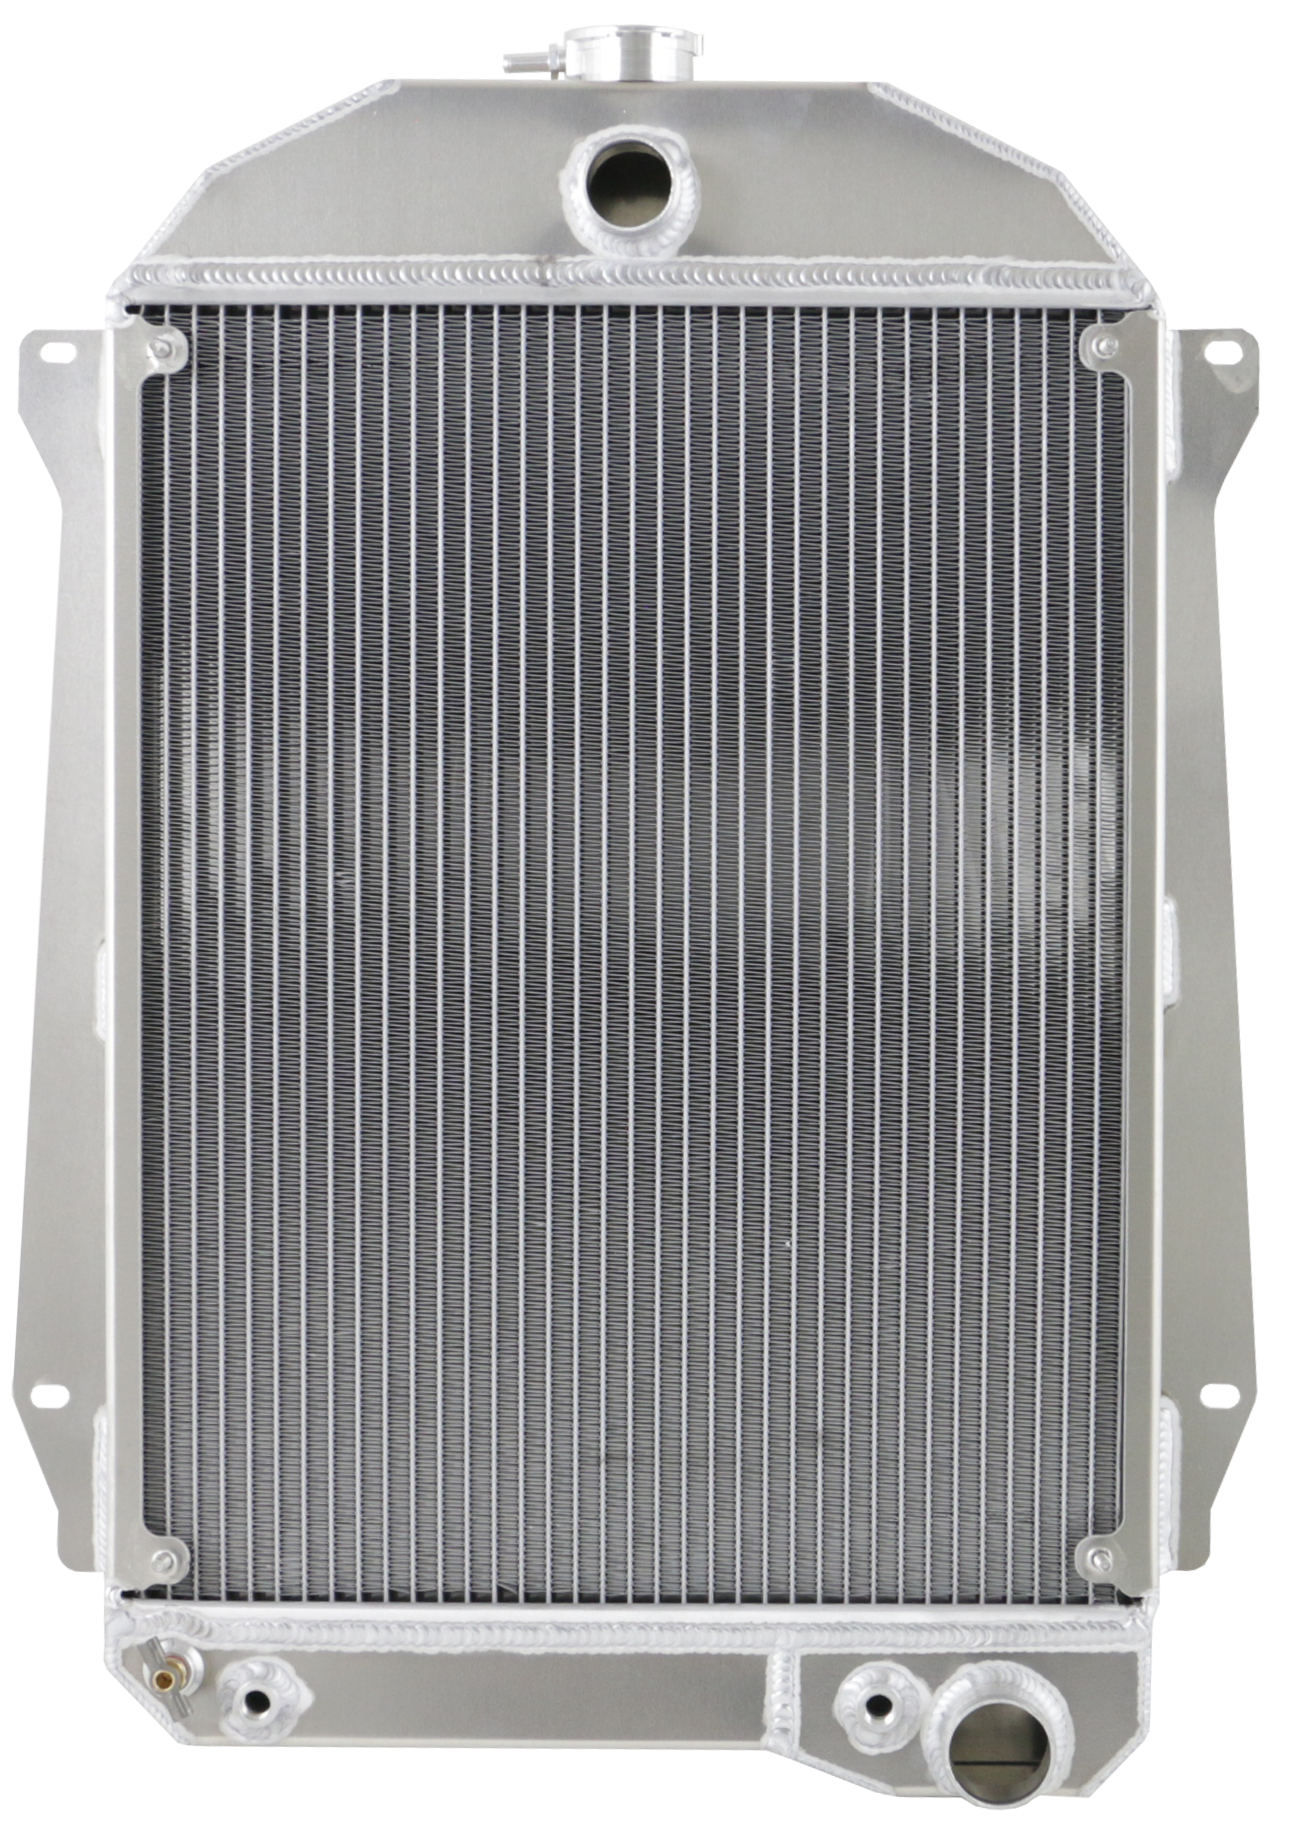 Wizard Cooling Inc - Wizard Cooling - 1940-1941 Chevrolet Street Rod Aluminum Radiator w/ ANGLED BRACKETS - 10506-110